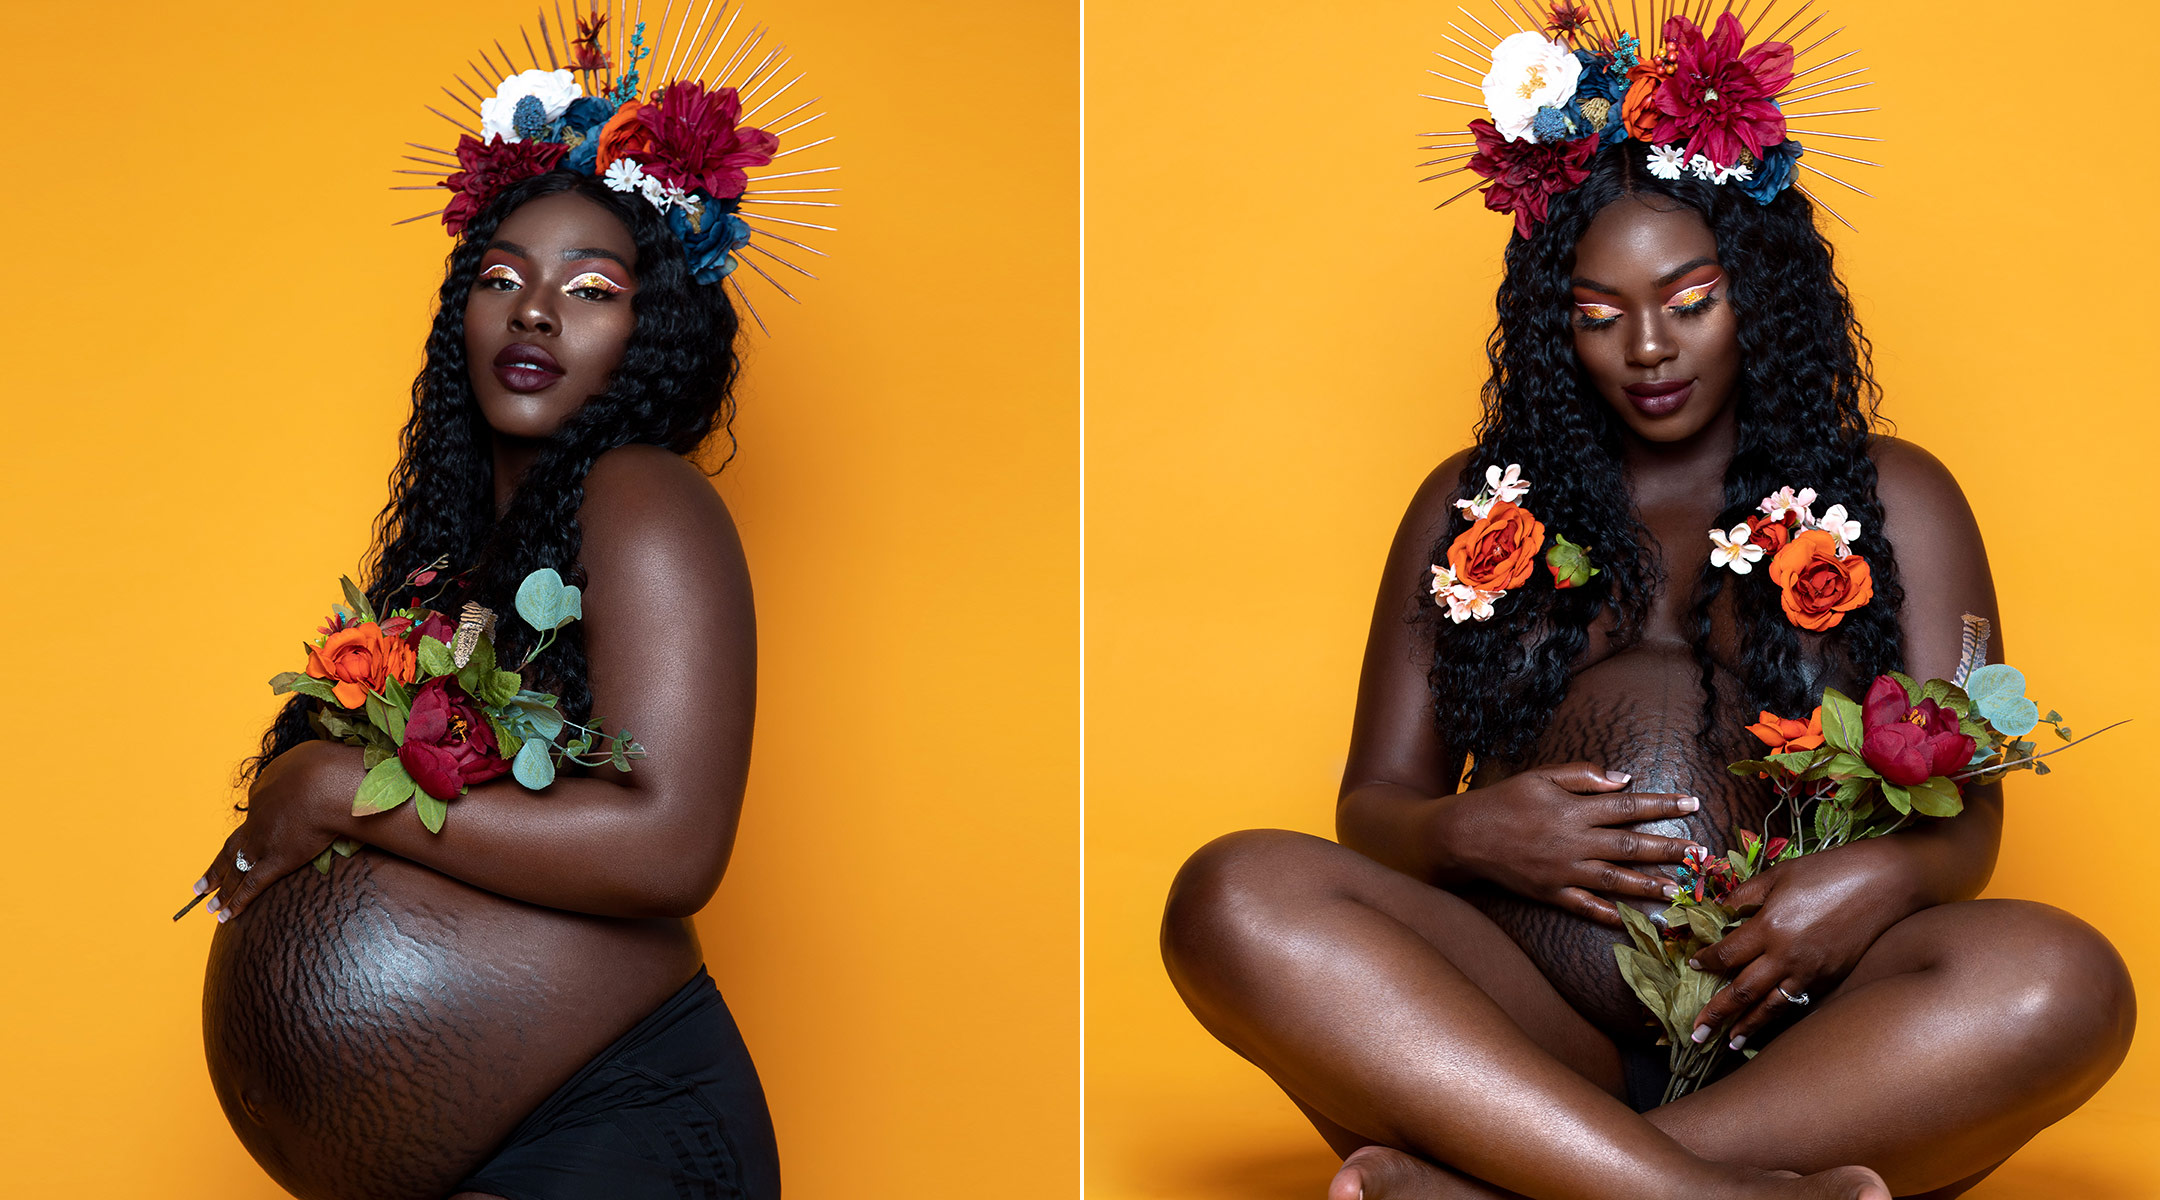 unedited maternity photo shoot helps women embrace their pregnant bodies